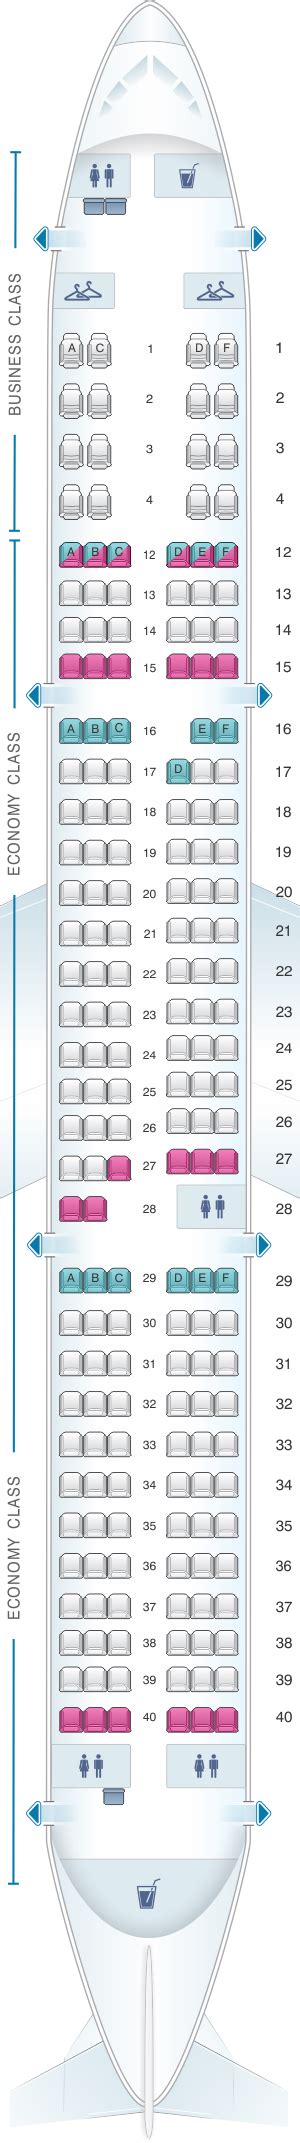 Seat Map Airbus A Thomas Cook Best Seats In The Plane Hot Sex Picture